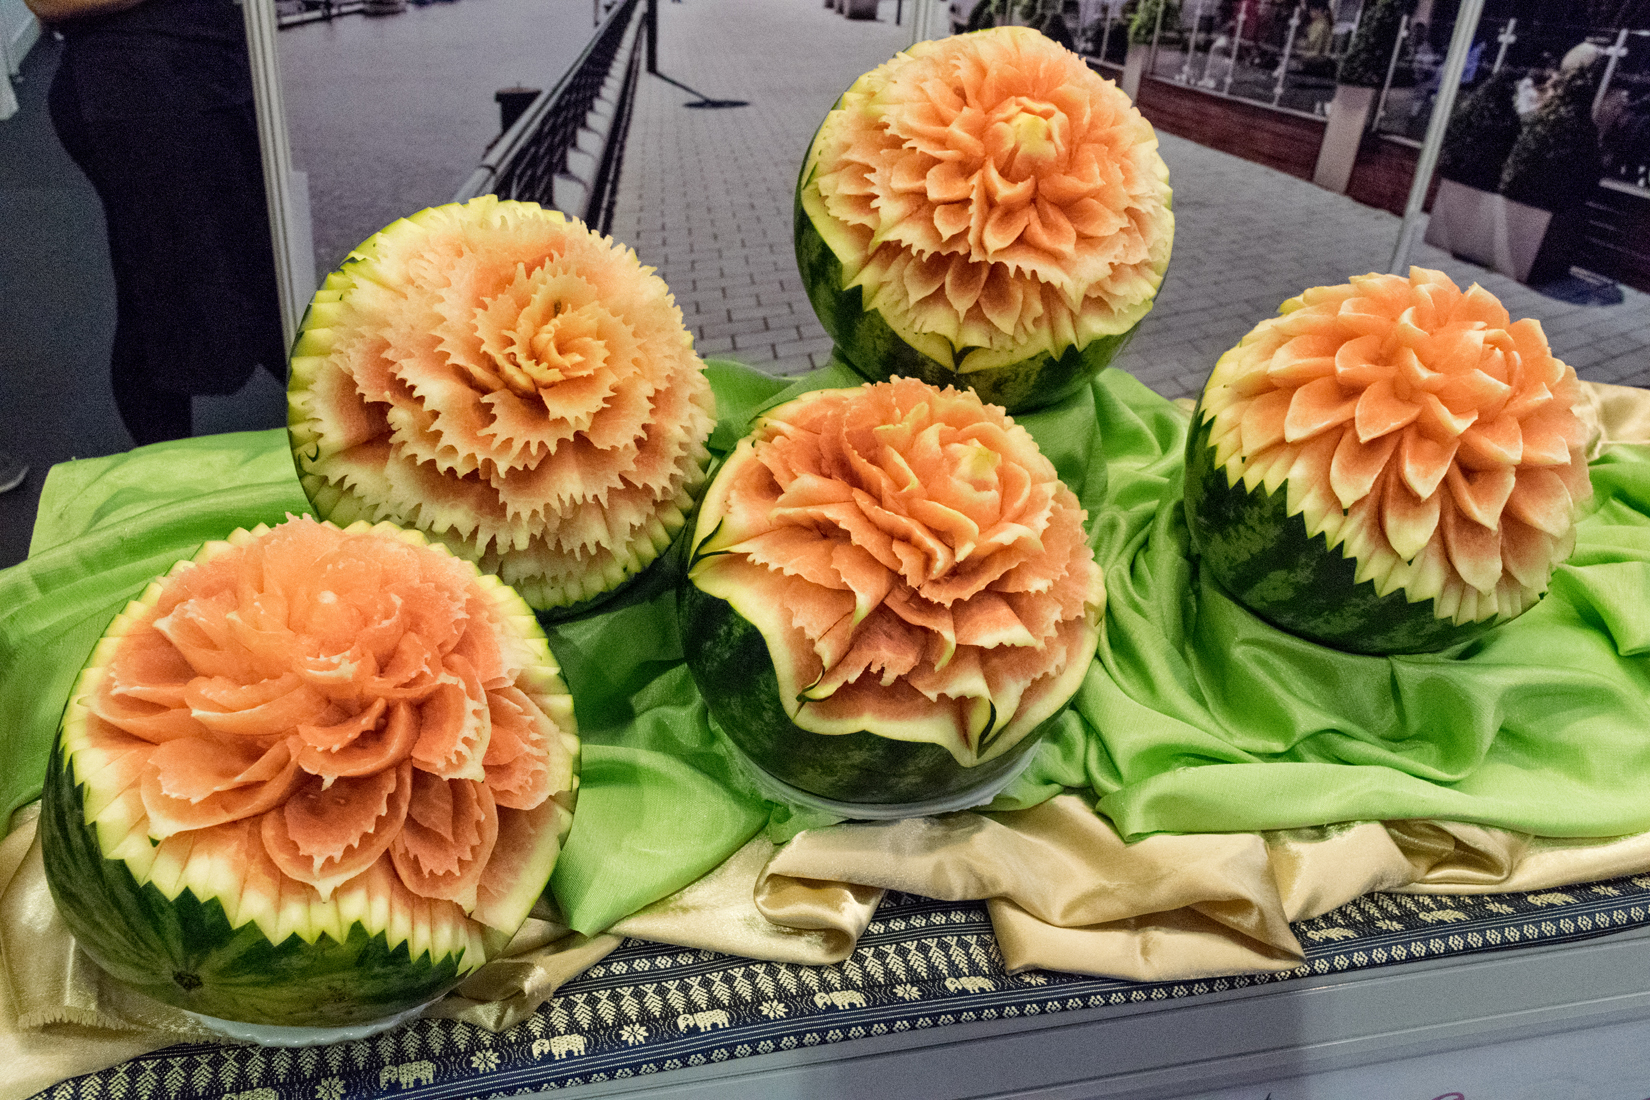 Carved watermelons against a backdrop photograph at the Blue Elephant pop-up Thai restaurant